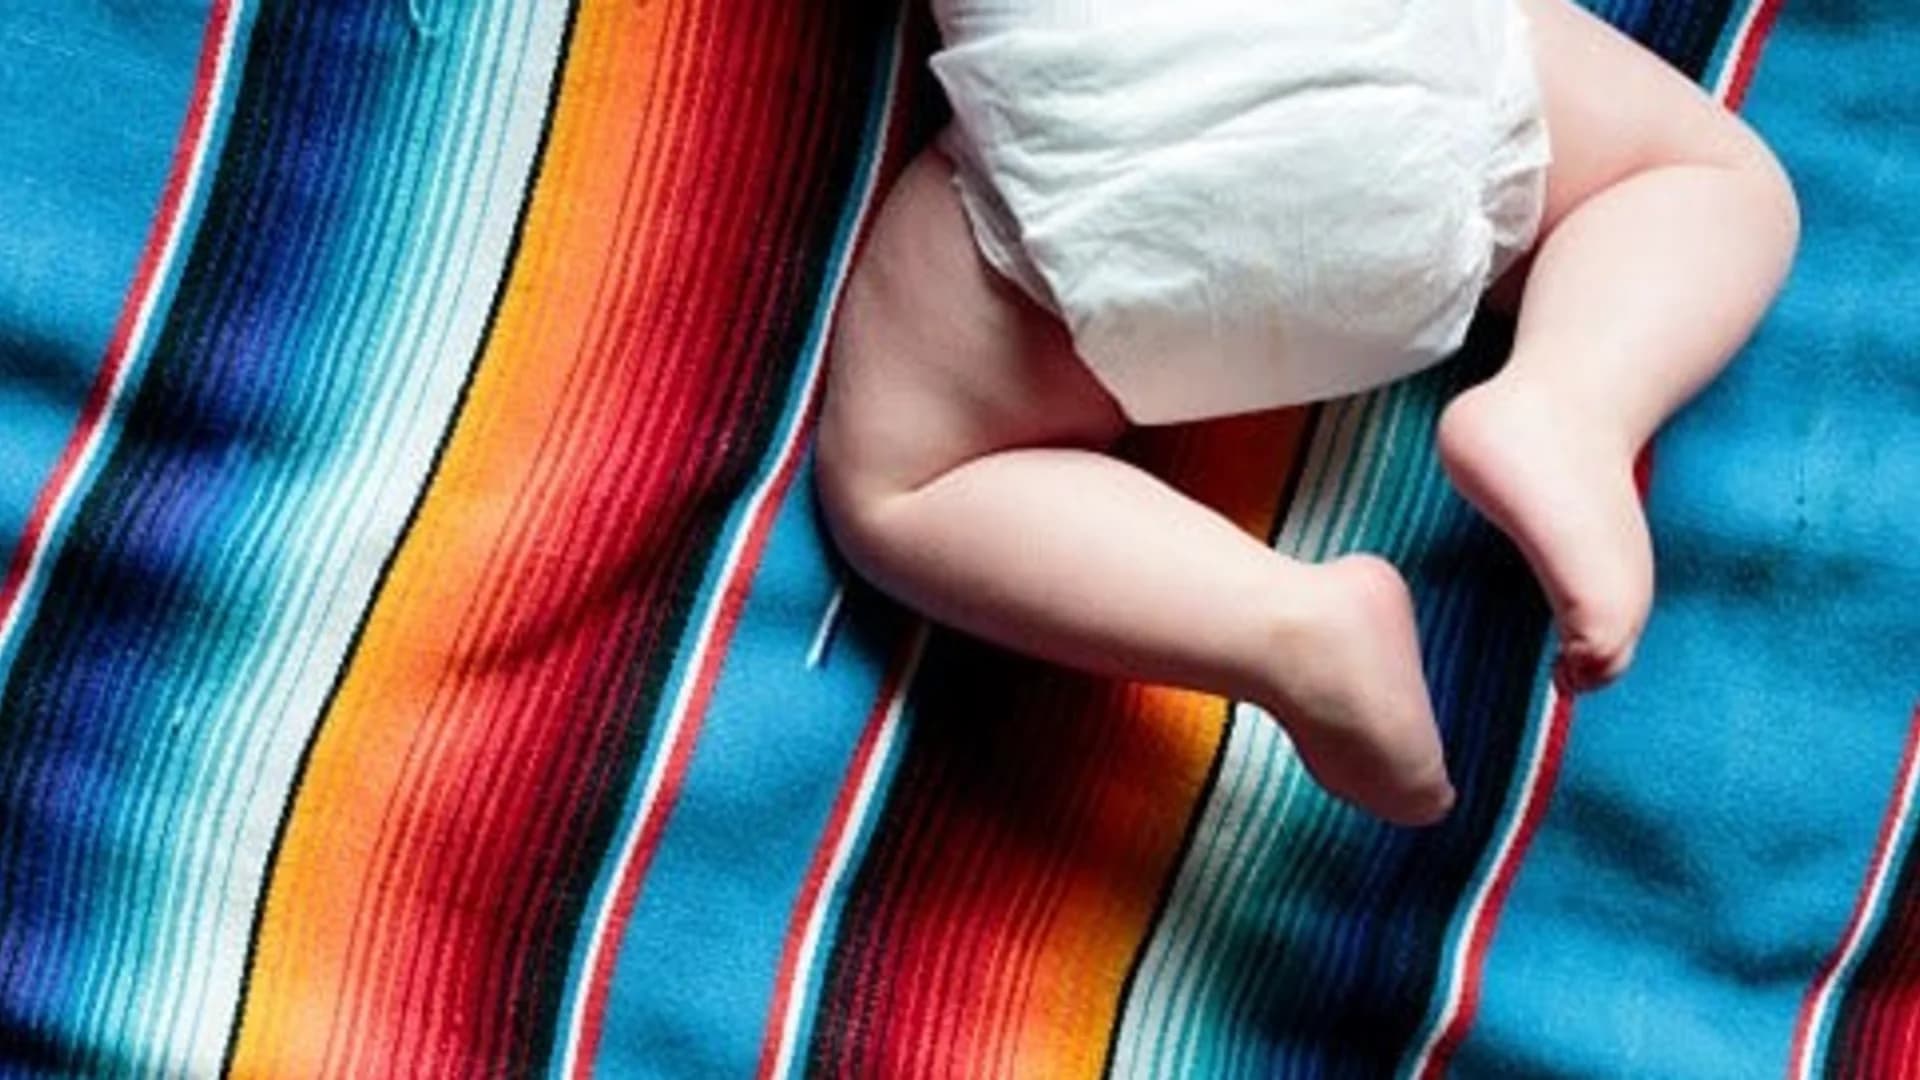 Sexuality expert says parents must ask baby's permission before changing diaper